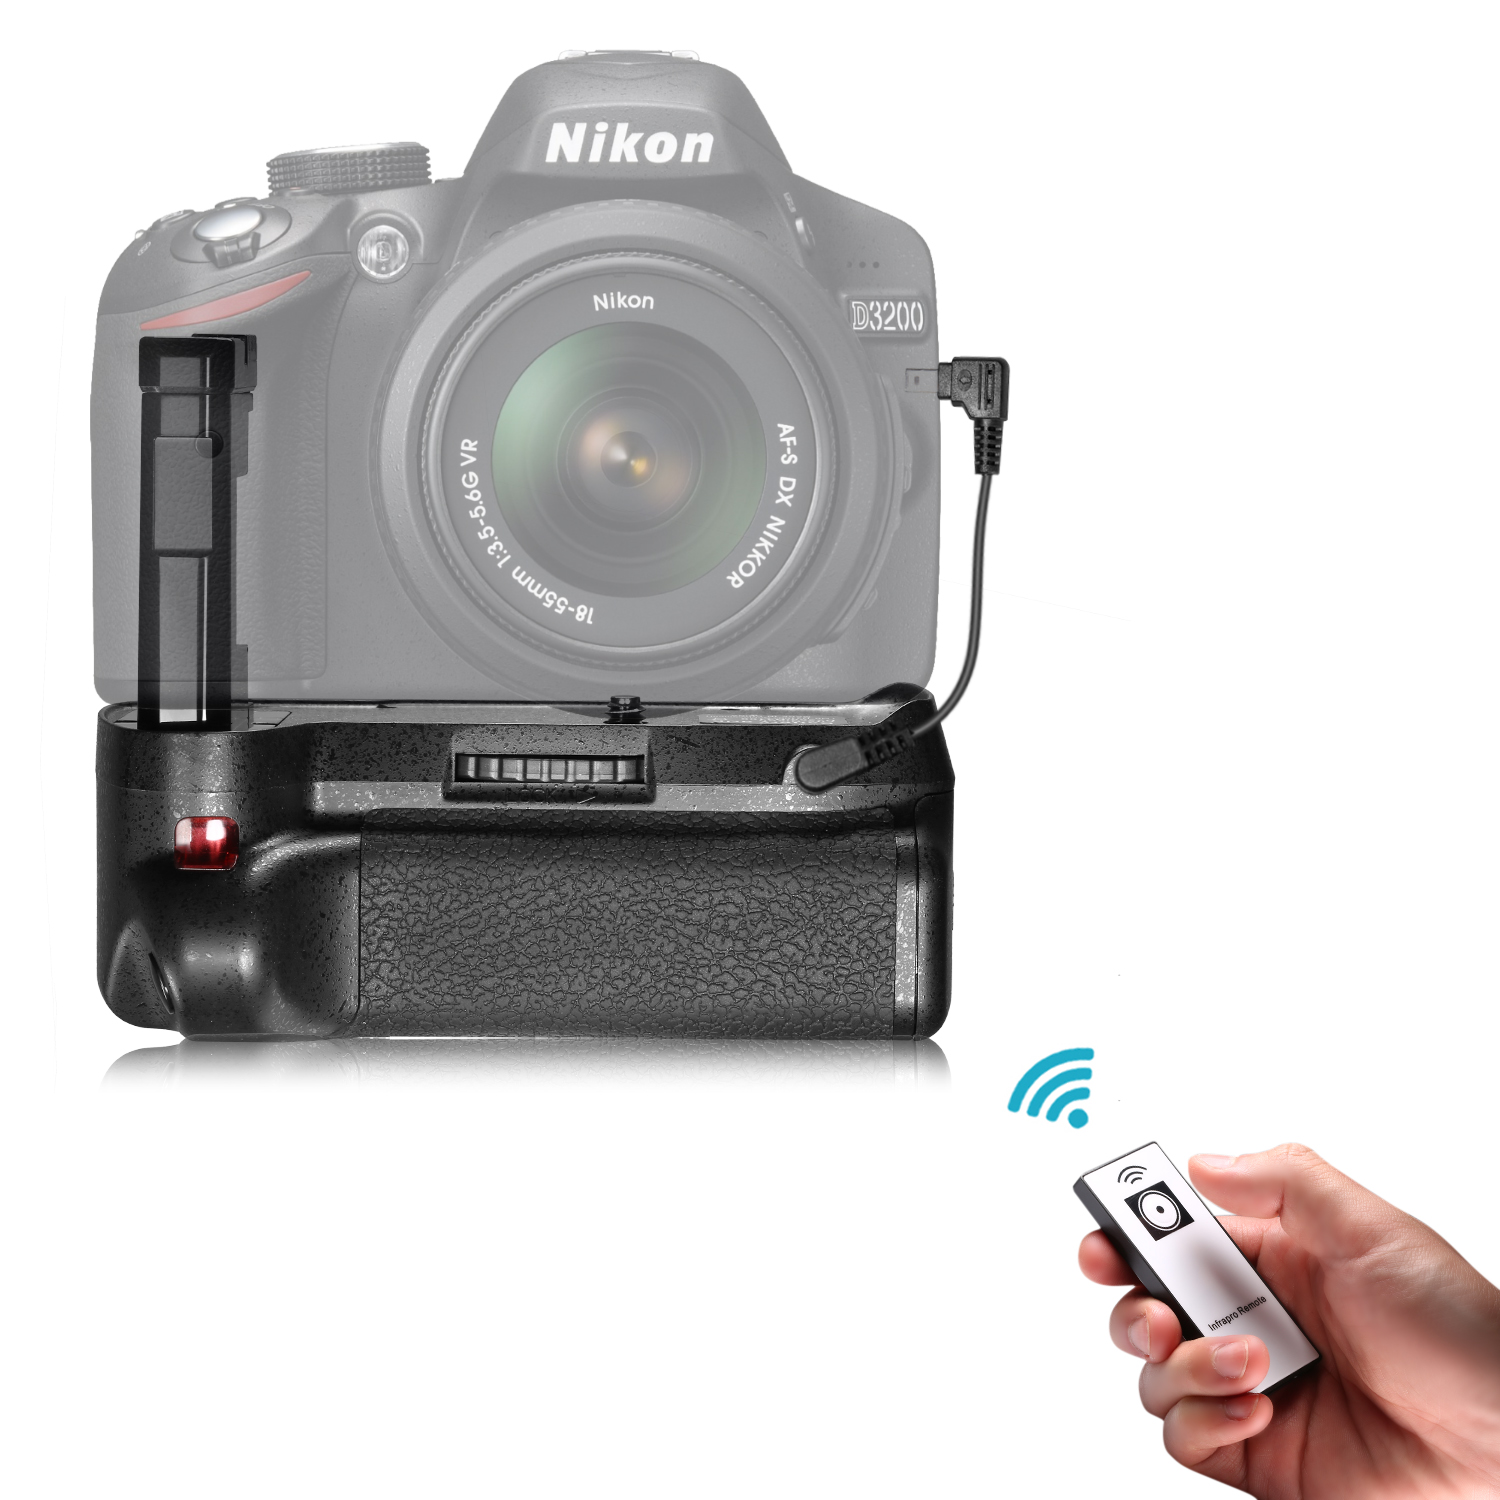 How To Install Battery Grip Nikon D3200